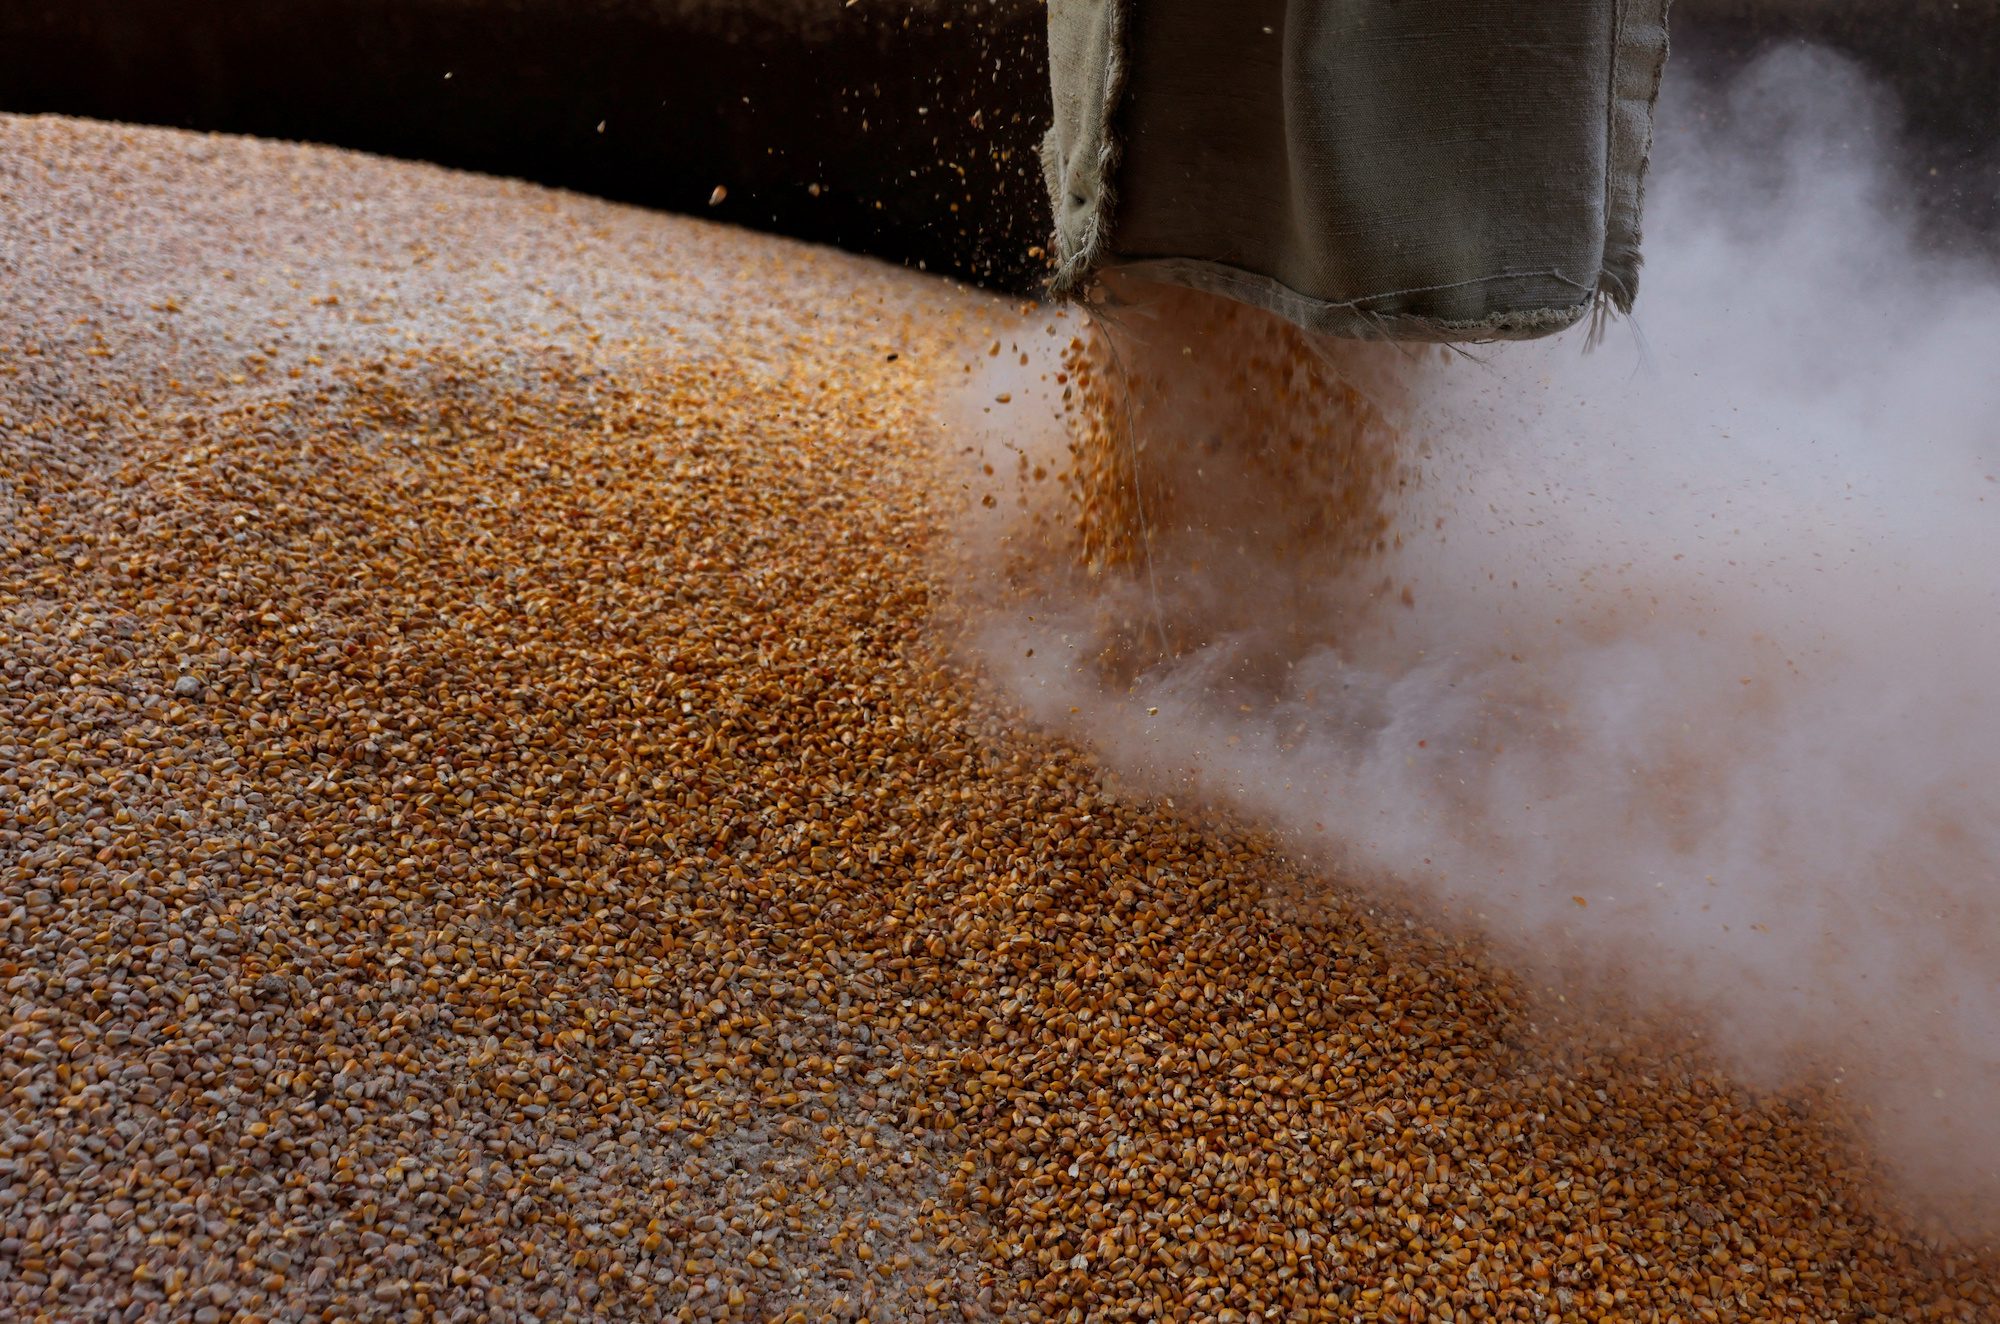 Russia and Ukraine Sign Deal to Restore Grain Exports